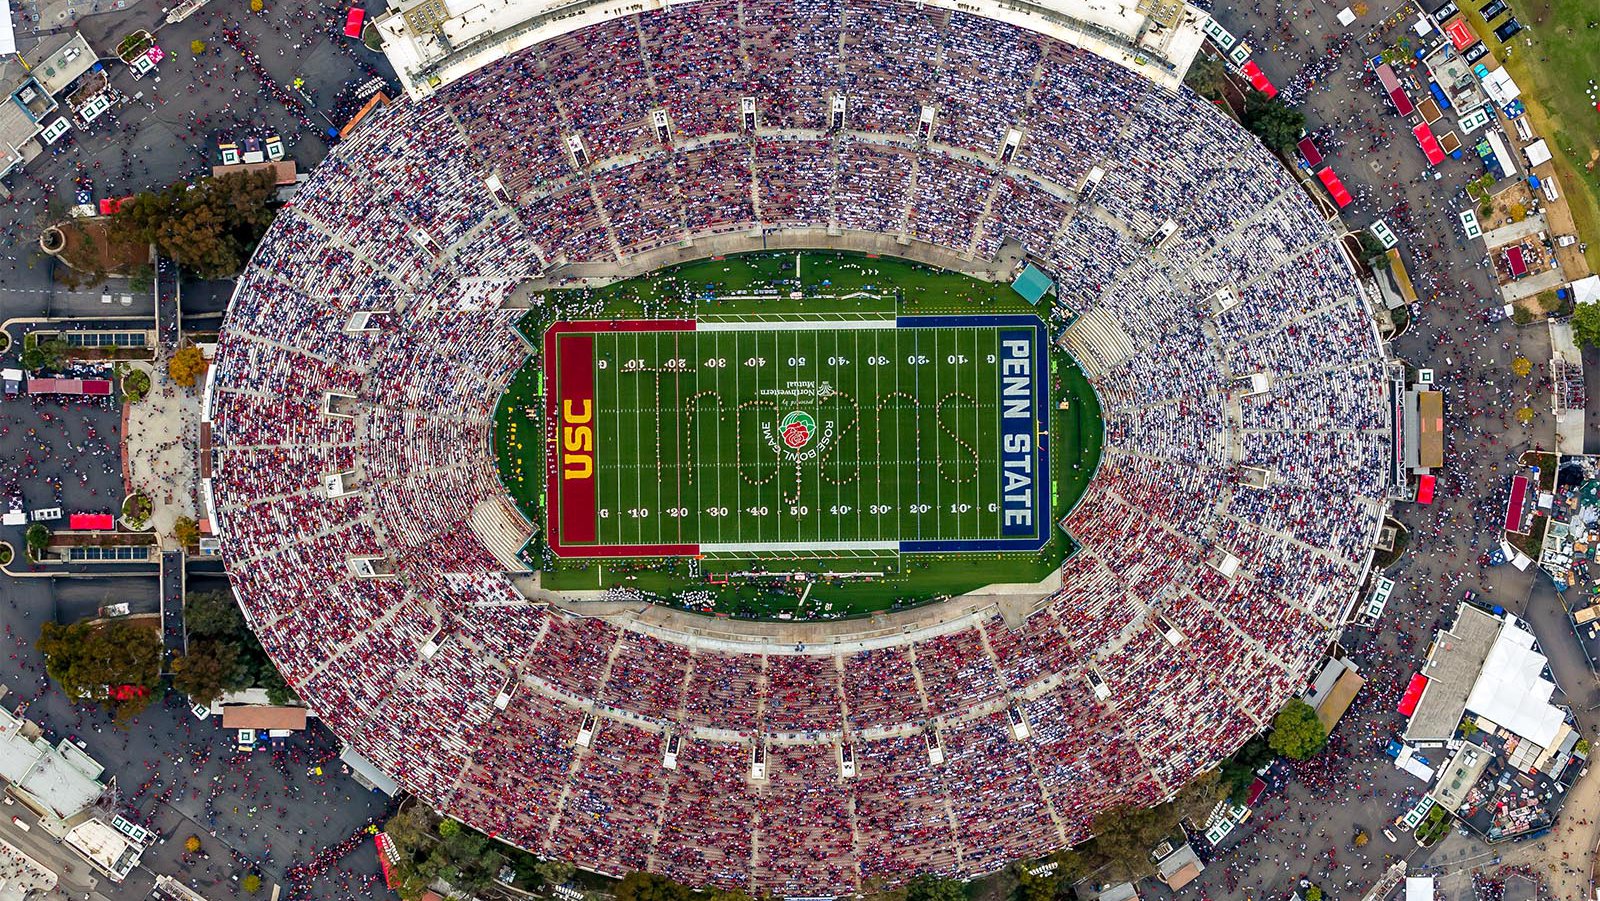 Blog picture of the 2017 Rose Bowl Game where the USC Trojans Football Team played the Penn State University Nittany Lions